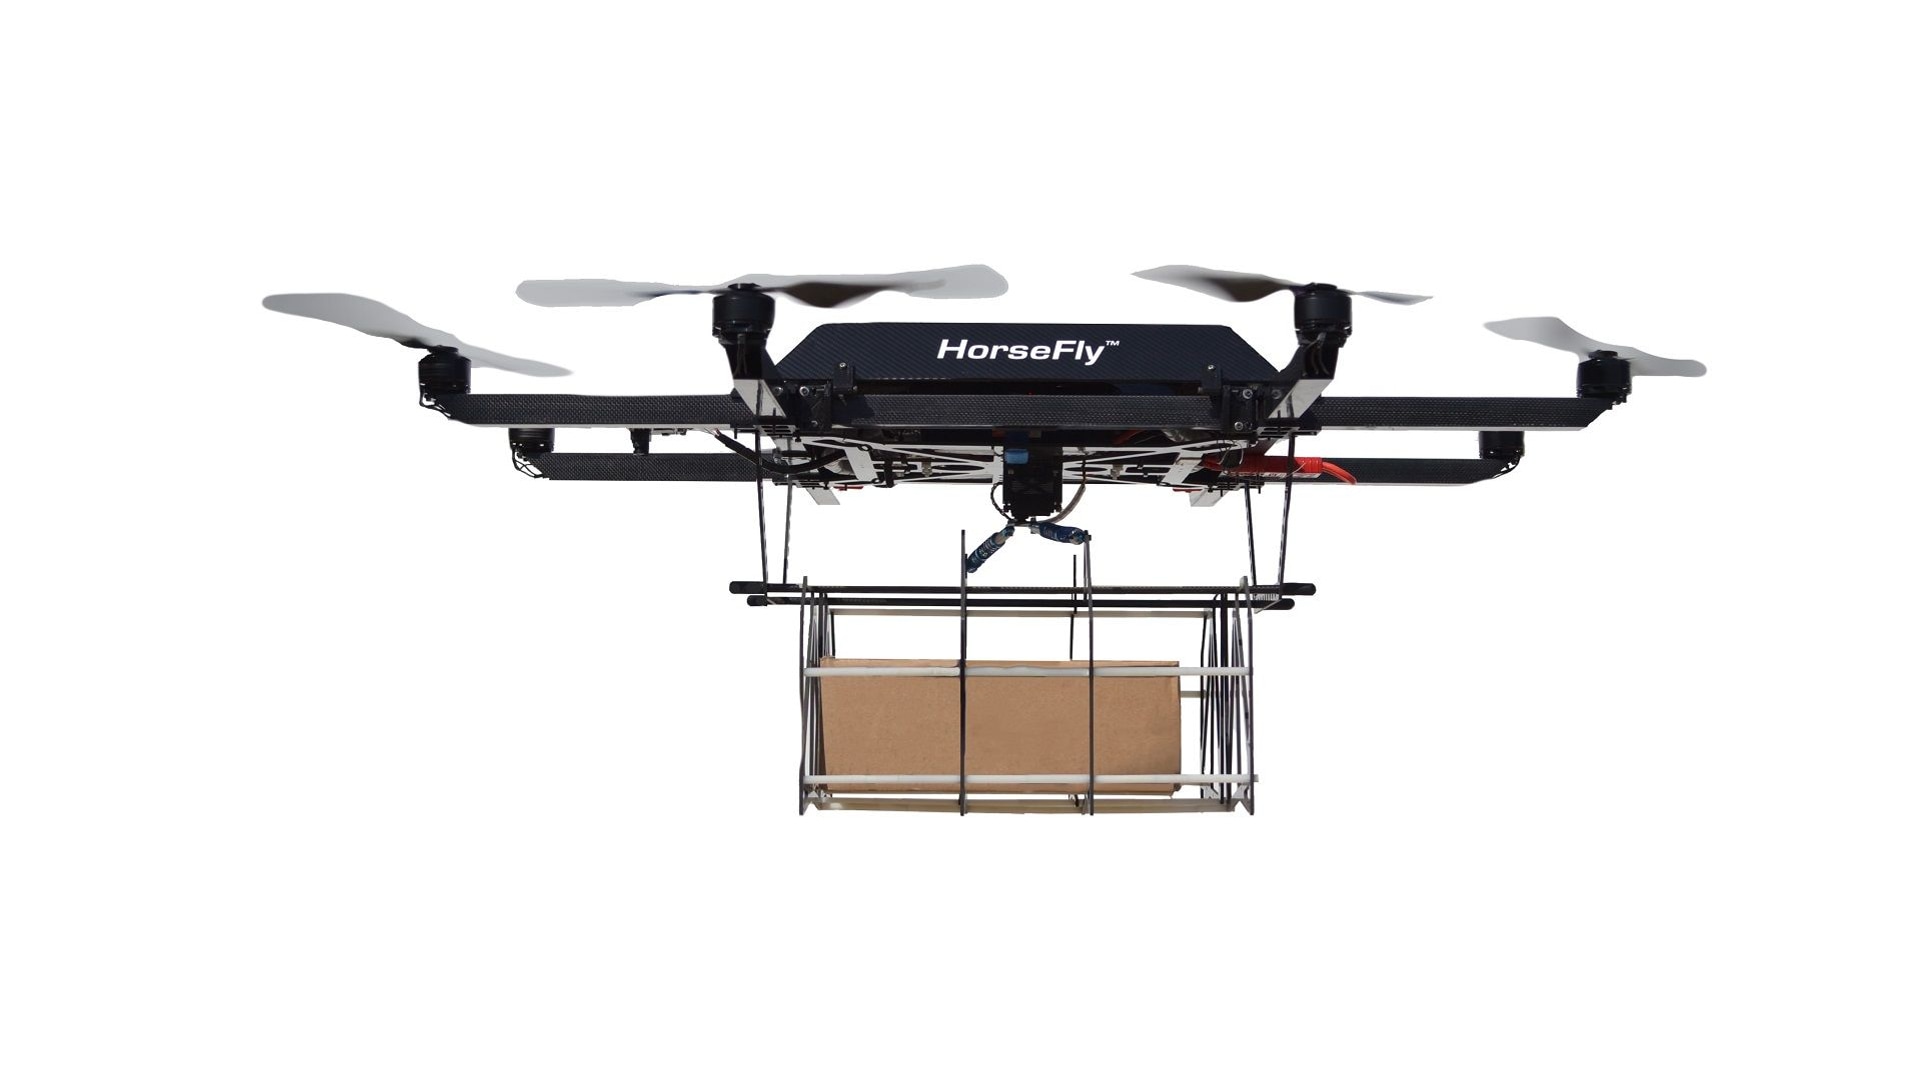 HorseFly drone option for Workhorse N-Gen electric delivery van